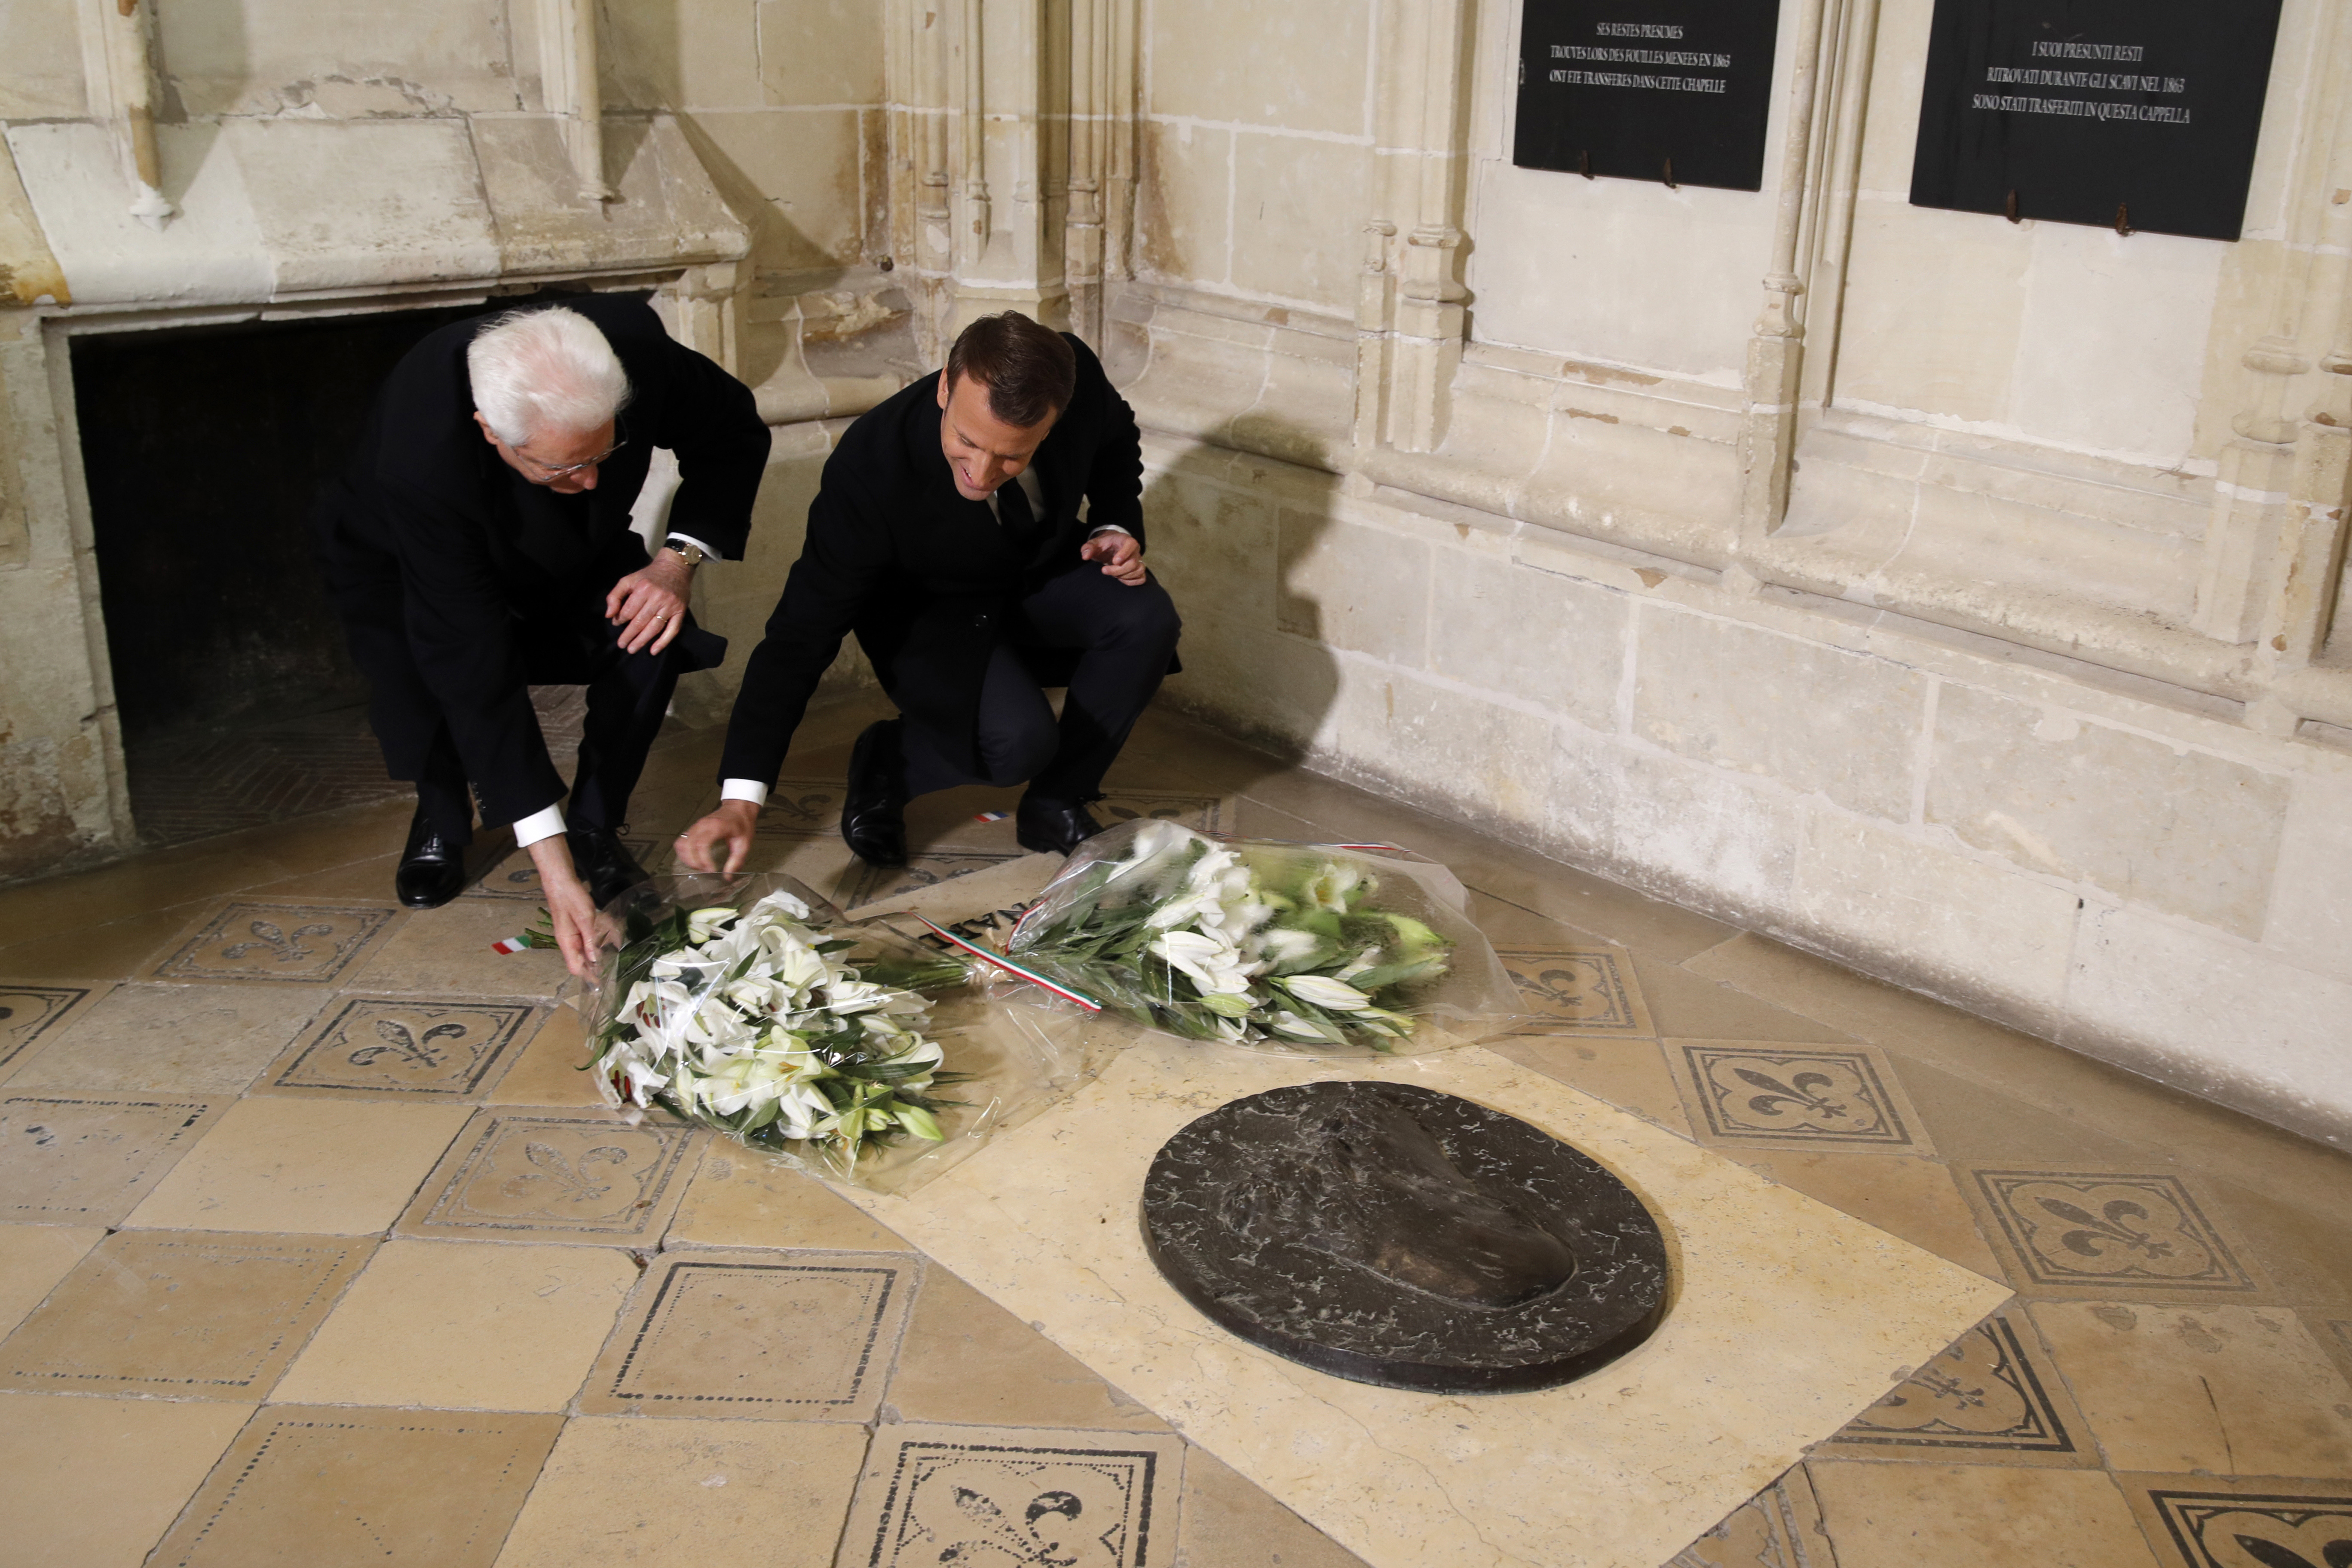 French President Emmanuel Macron and Italian President Sergio Mattarella pay their respects at the tomb of Italian renaissance painter and scientist Leonardo da Vinci to commemorate the 500th anniversary of his death, at the Saint-Hubert Chapel during a visit at the Chateau d'Amboise, in Amboise, south of Paris, France, Wednesday, May 2, 2019. (Philippe Wojazer, Pool via AP)